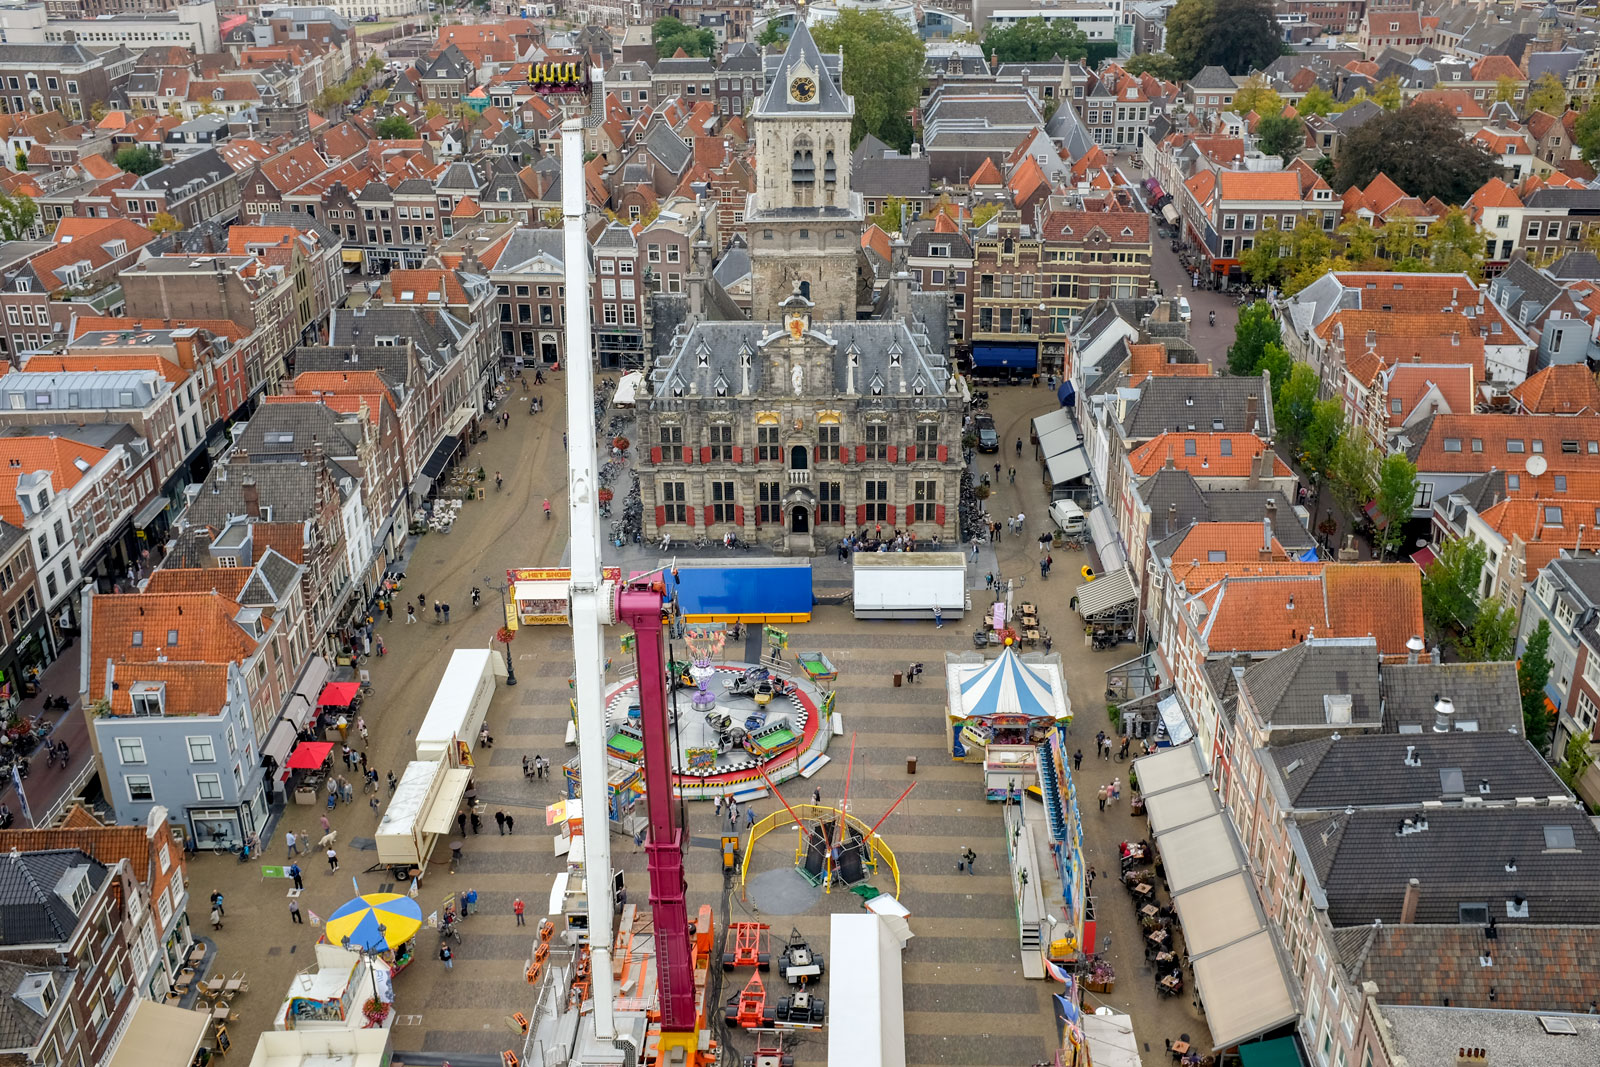 View from the top of the tower at Delft's New Church